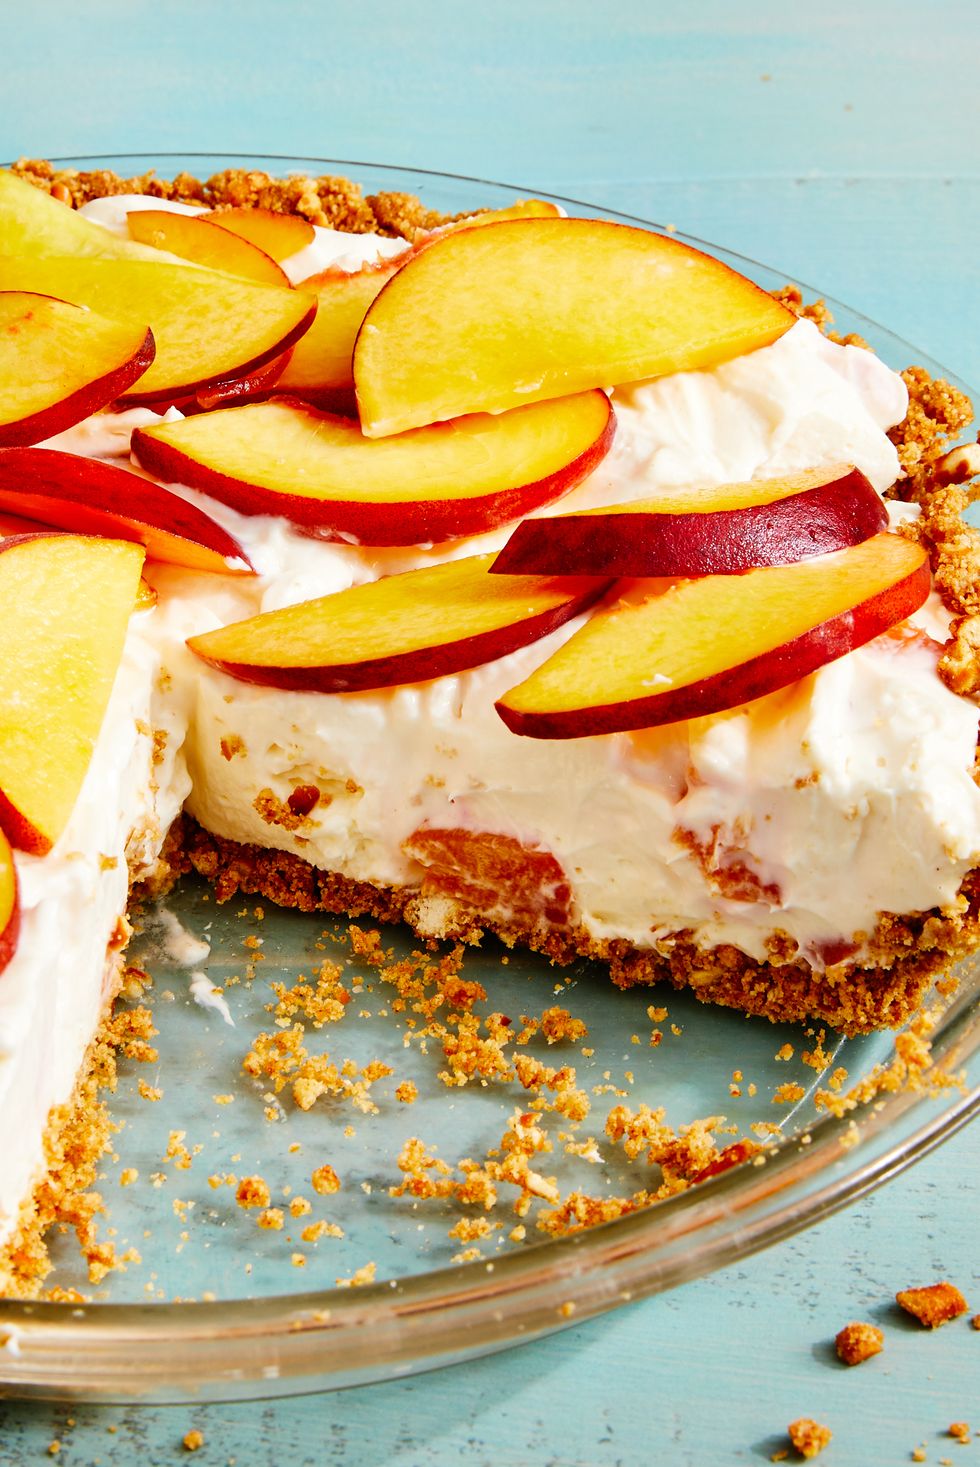 13 No-Bake Pie Recipes - Pies That Don't Require An Oven